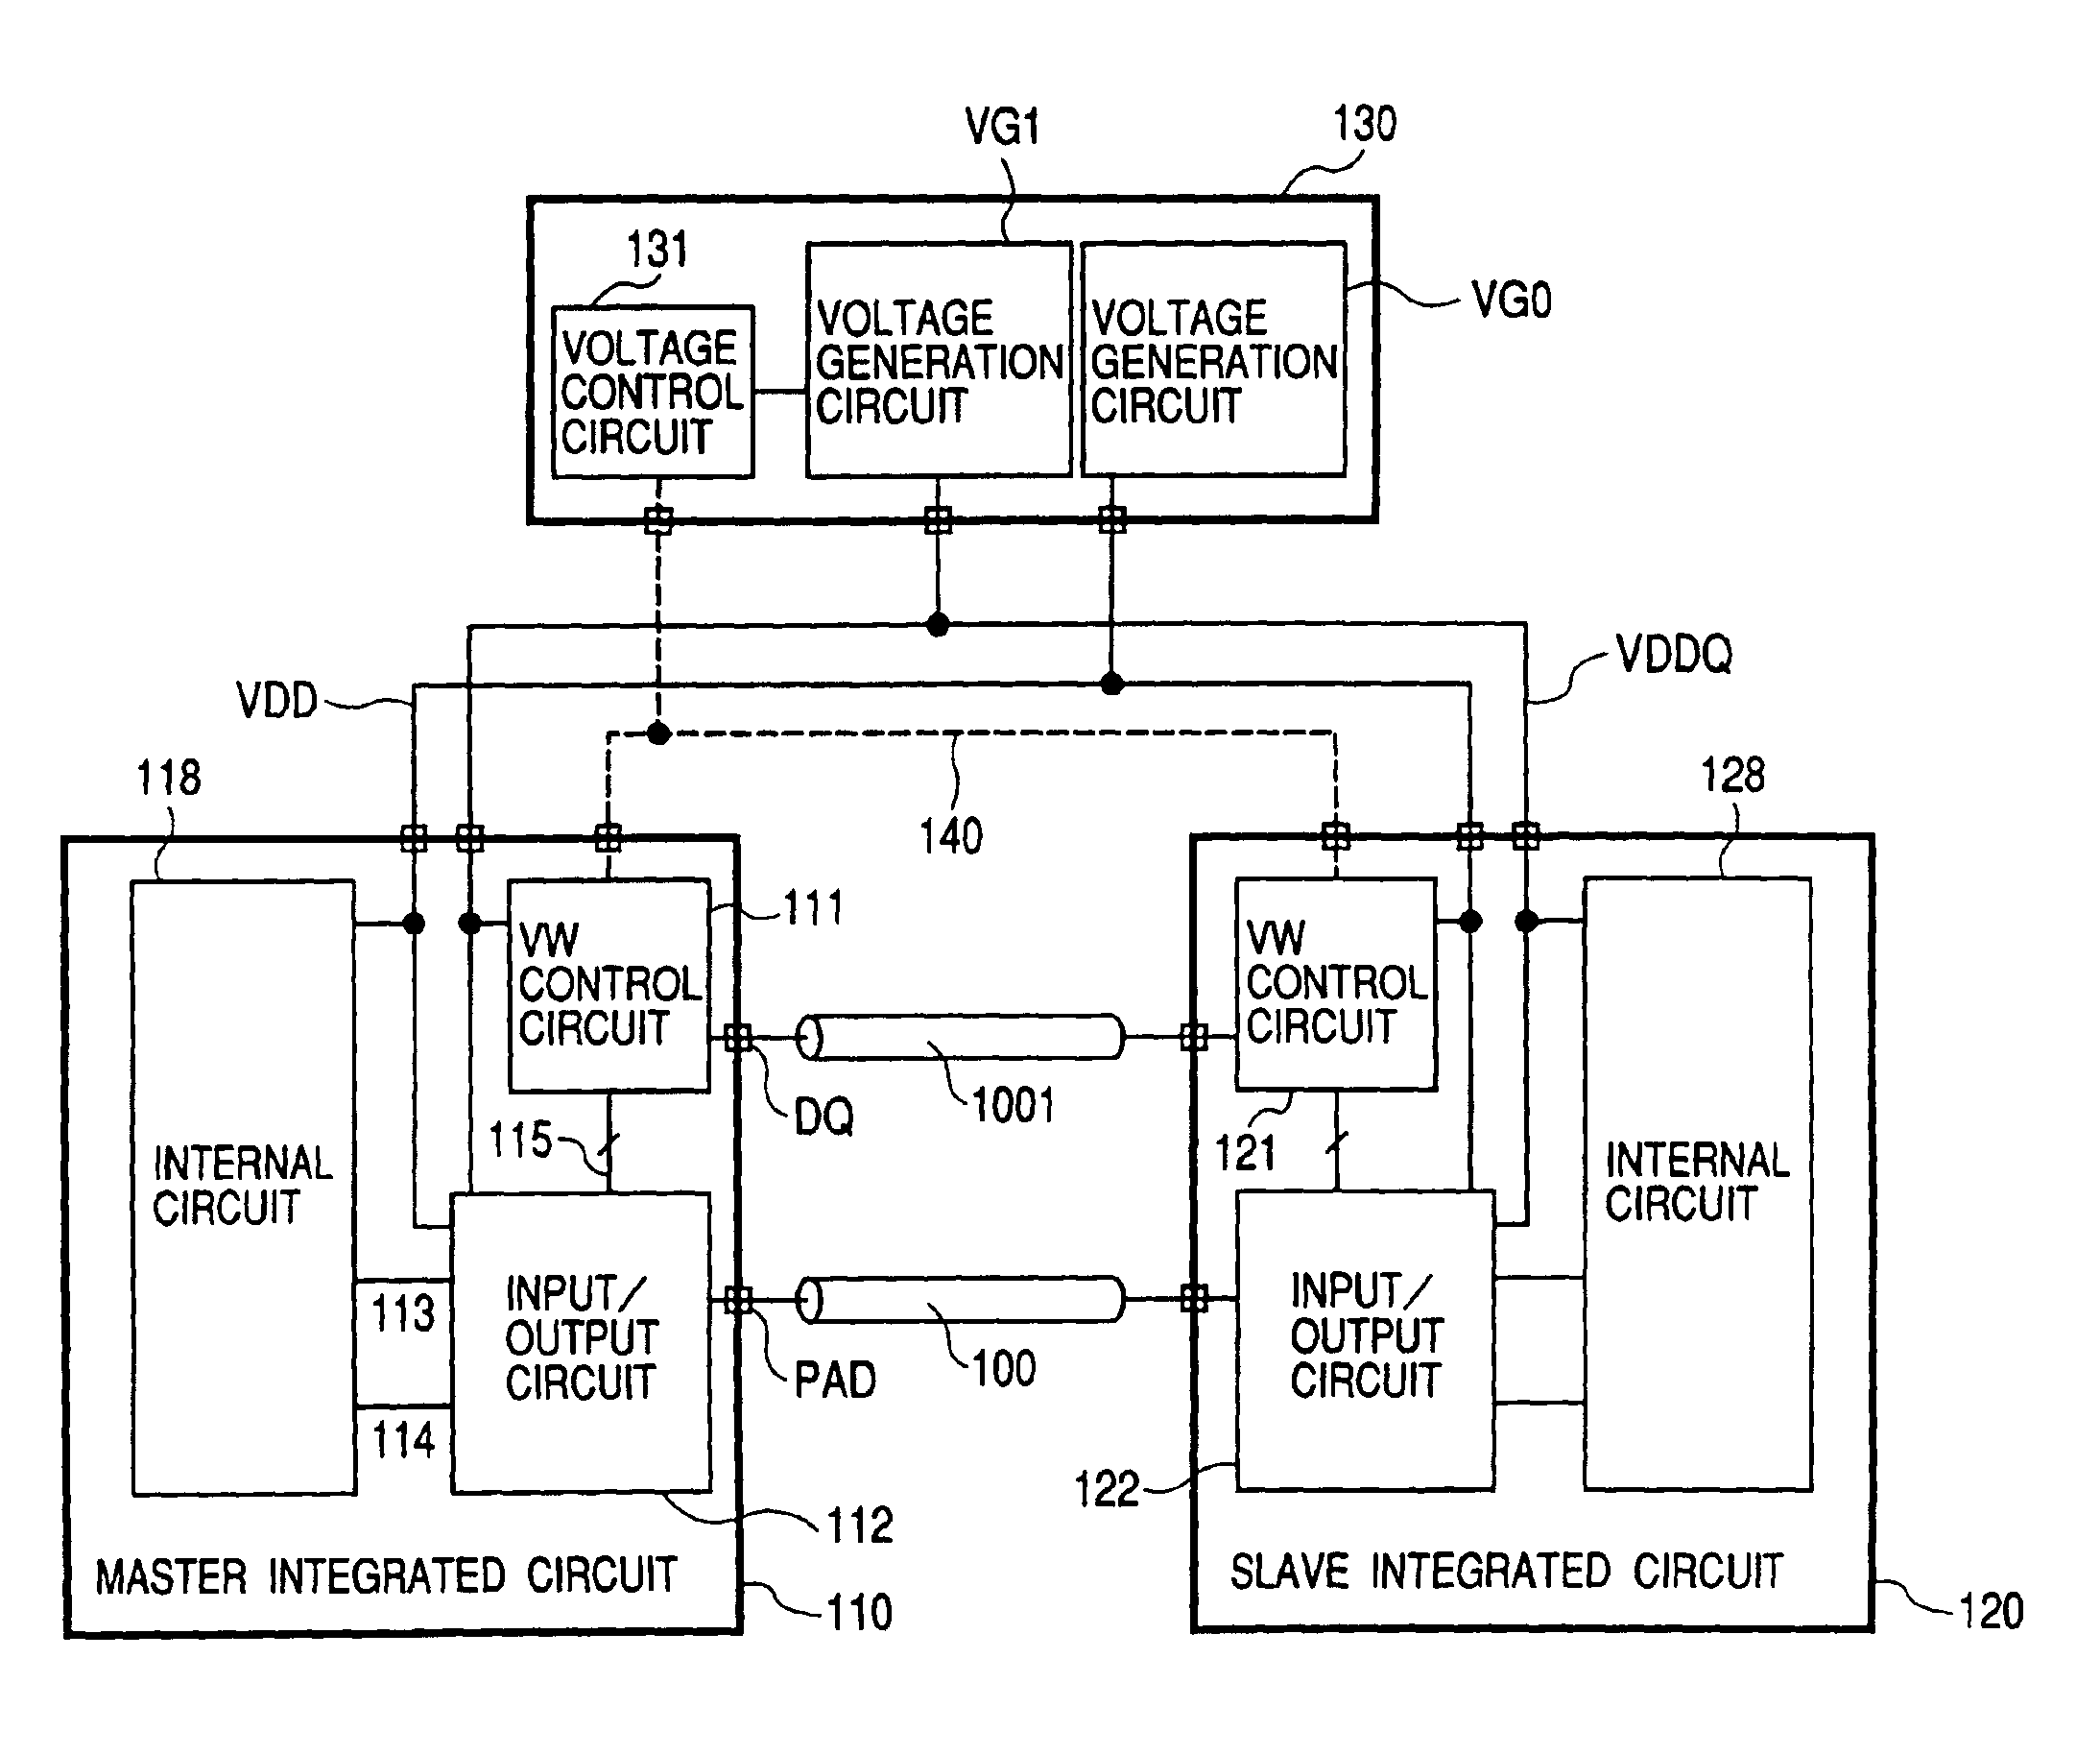 Output buffer circuit with control circuit for modifying supply voltage and transistor size